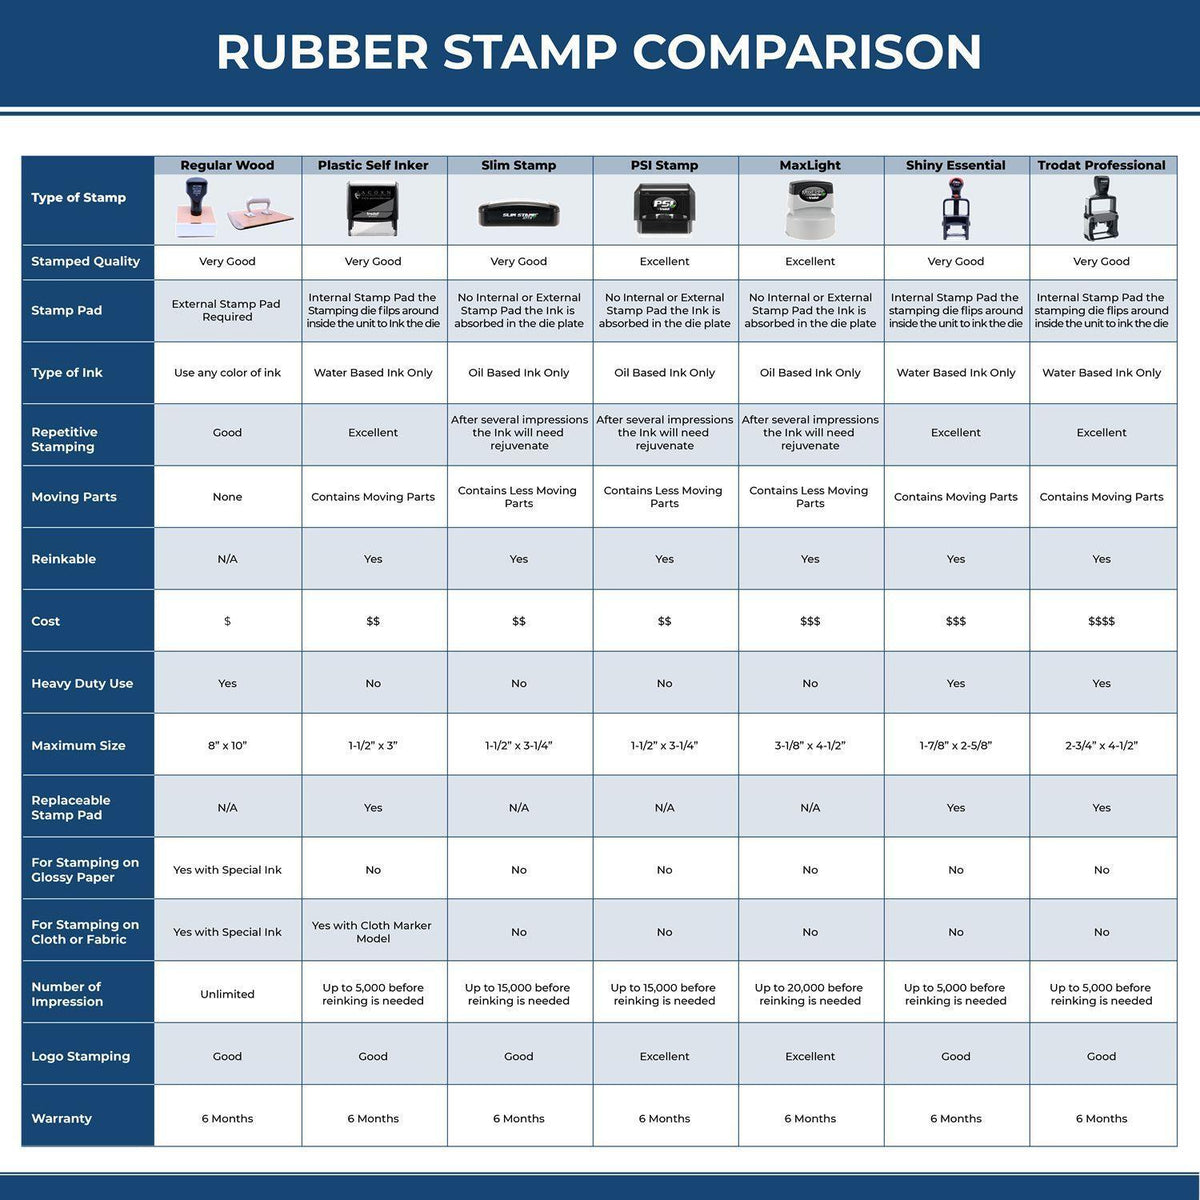 Large Allergies Rubber Stamp 4982R Rubber Stamp Comparison